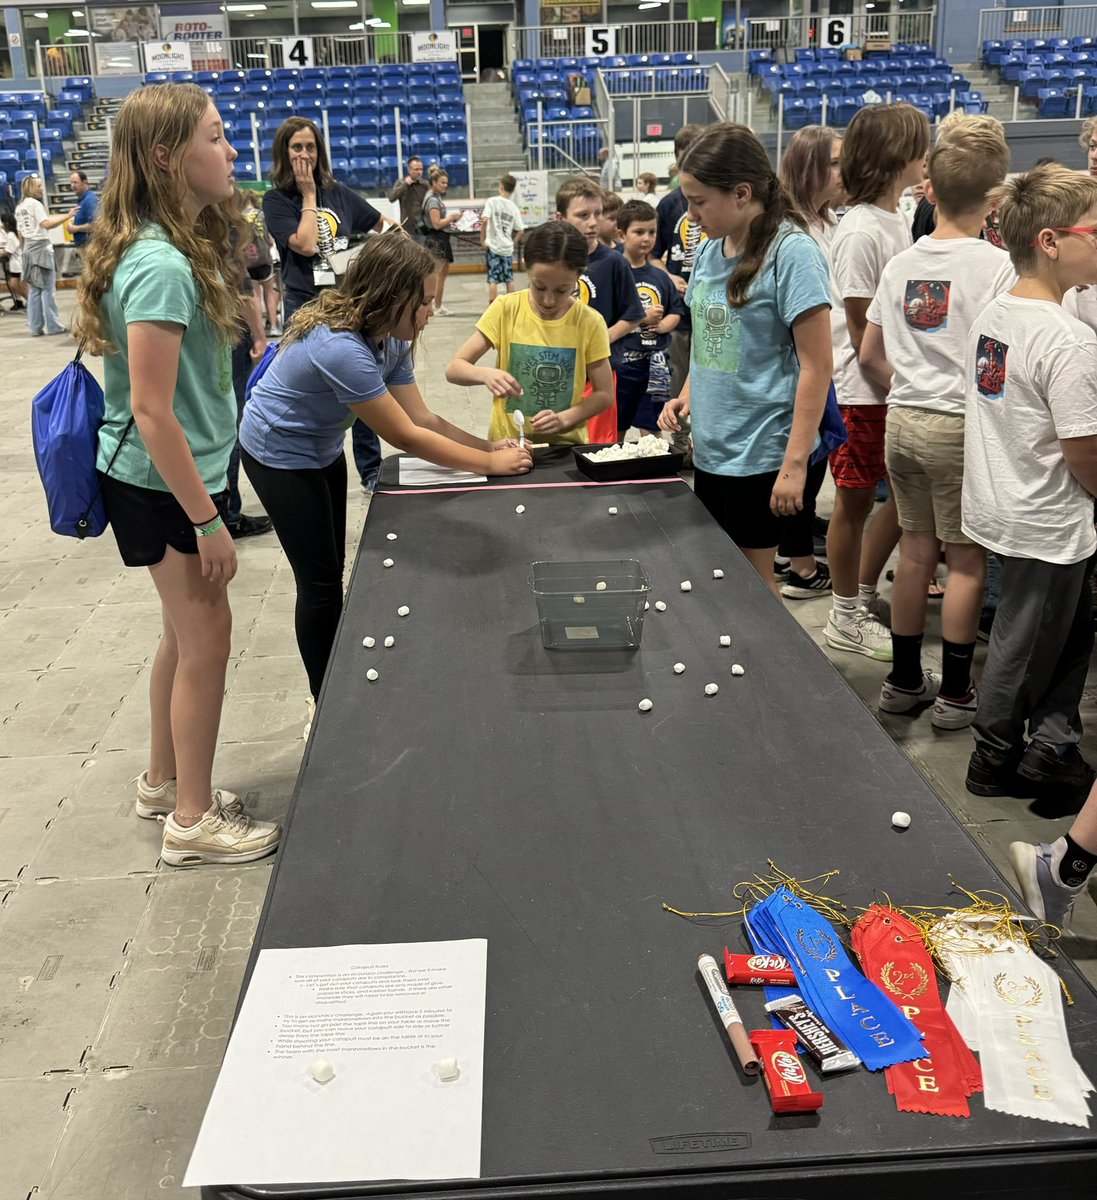 Trojans from Southwestern Central School District are pictured having a terrific time at the annual STEM Wars today at @NorthwestArena. The fun continues Thursday, May 23, 2024. 🚌 🧬 😎 #STEM #TeamSouthwestern #TrojanPride @MoDonahue @KaitlinRing @ThePost_Journal